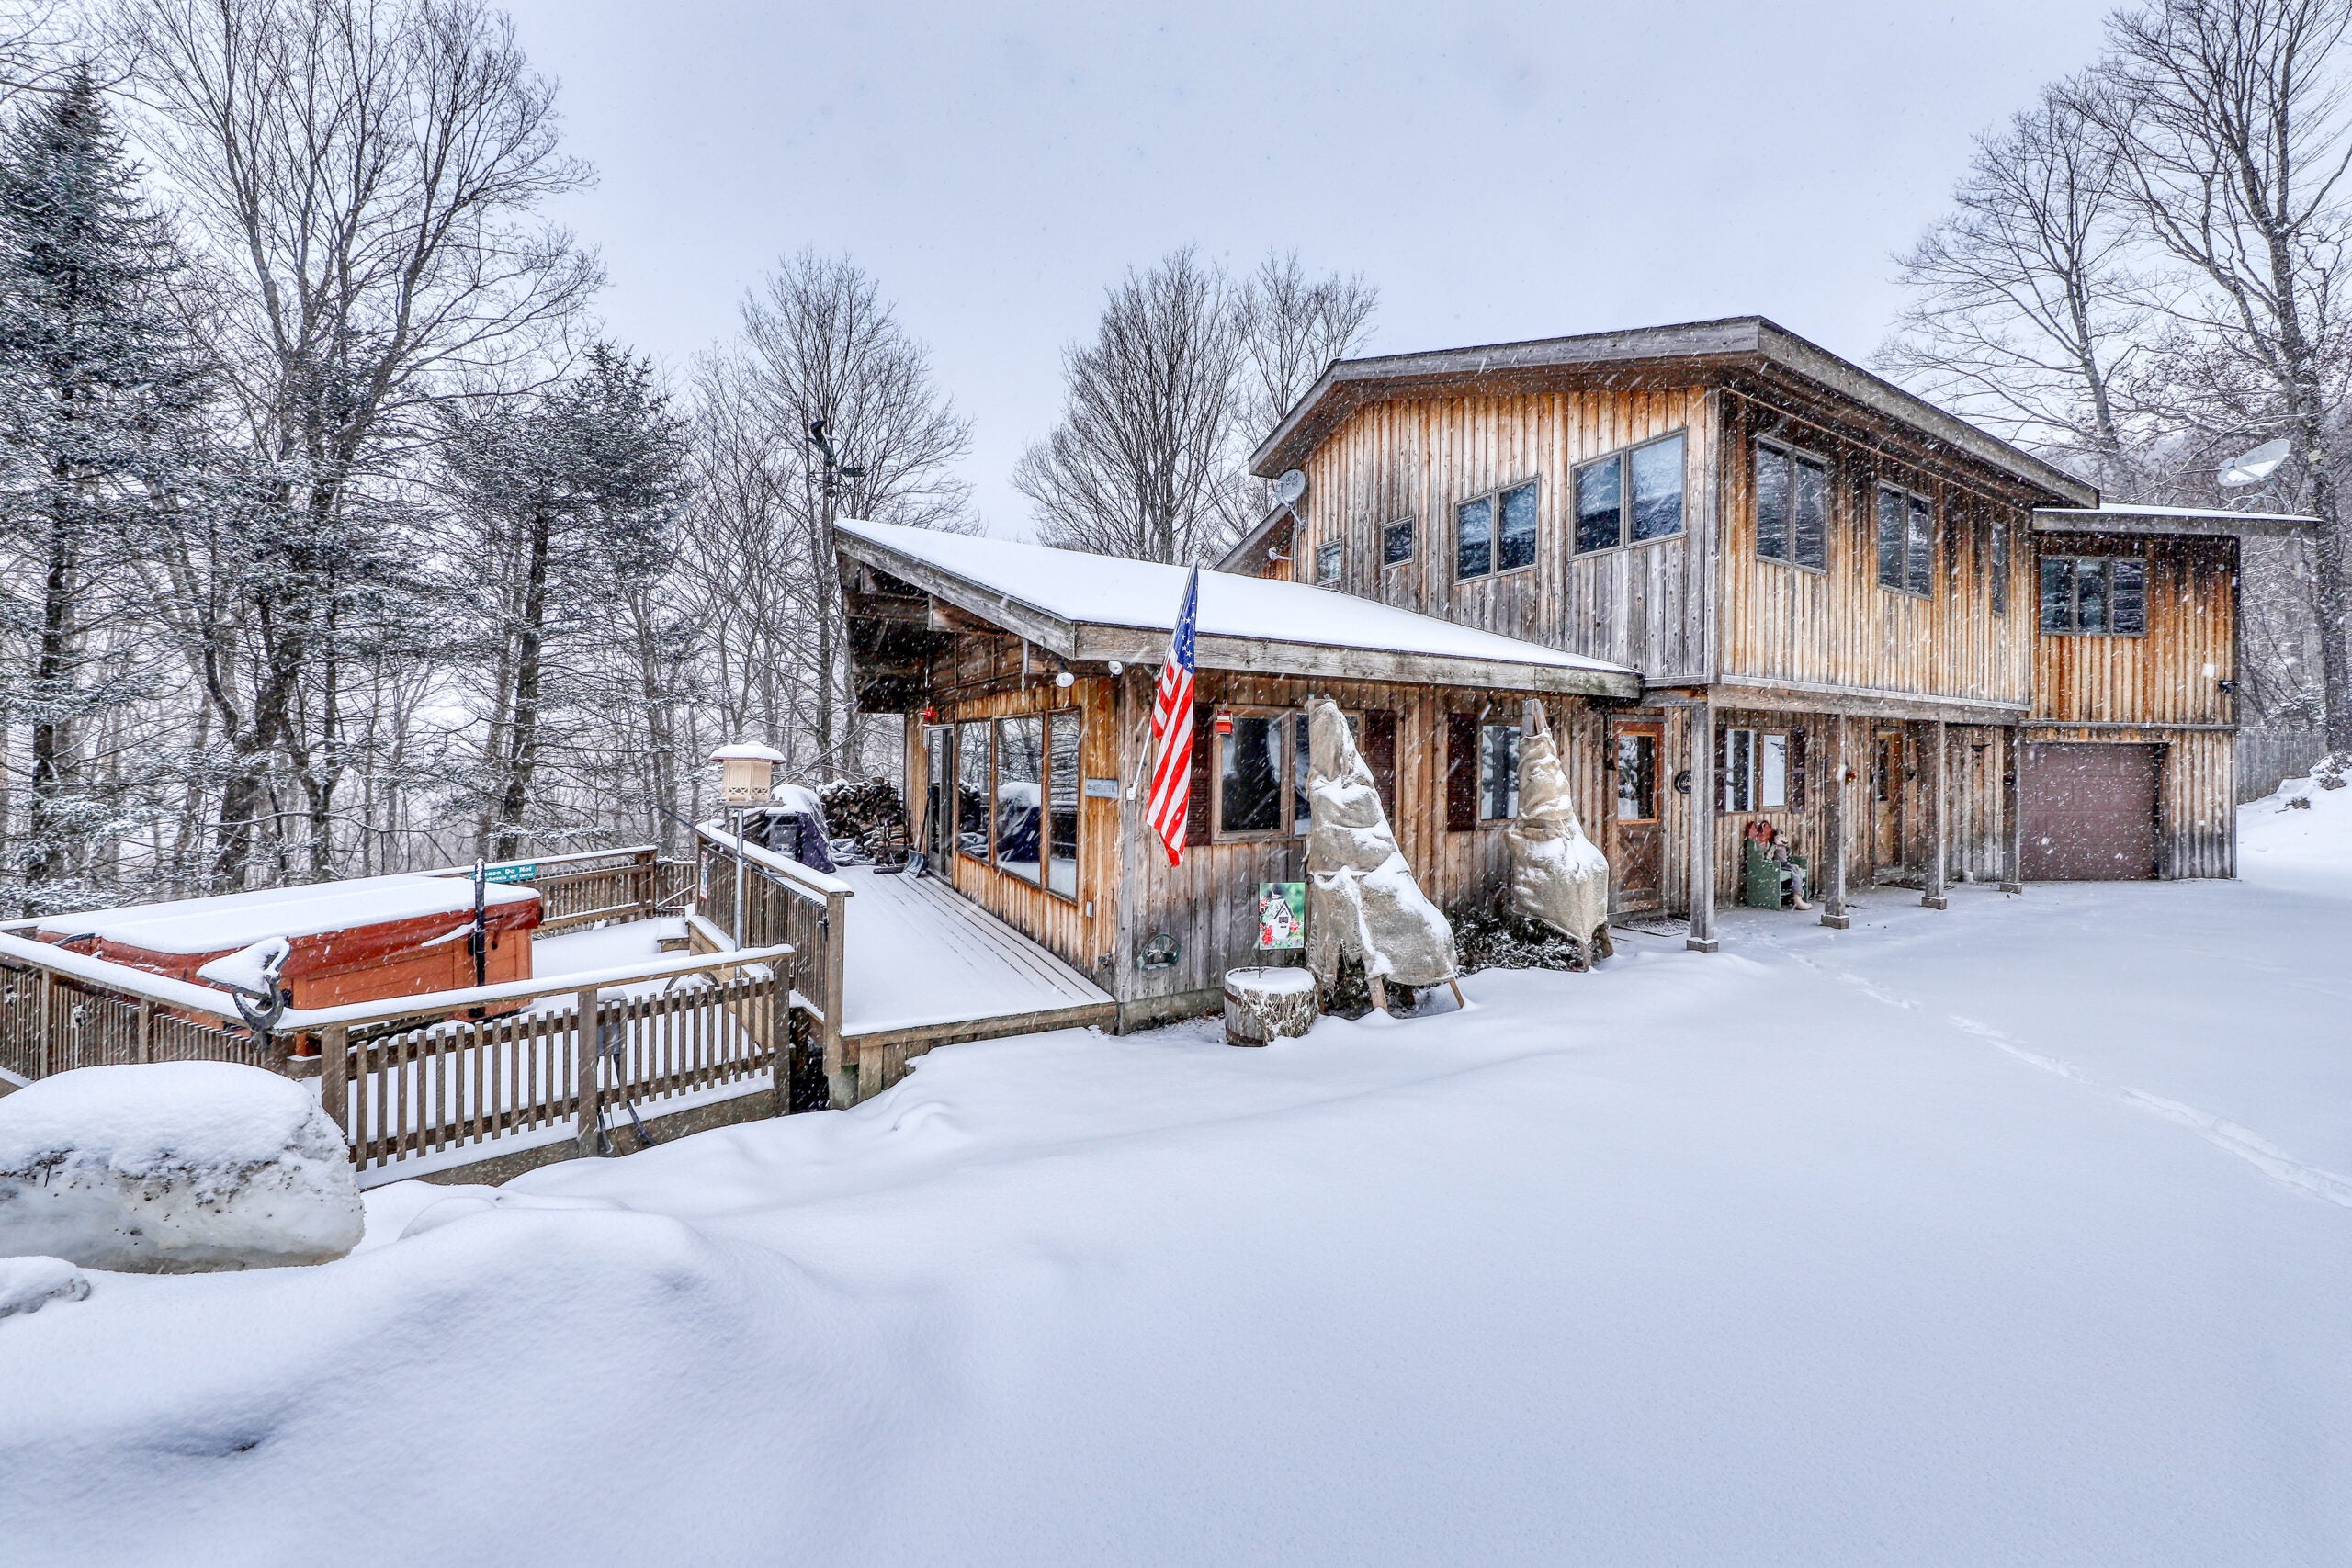 5 Ultra-luxe Ski Homes You Can Rent Right Now for the Holidays on Airbnb